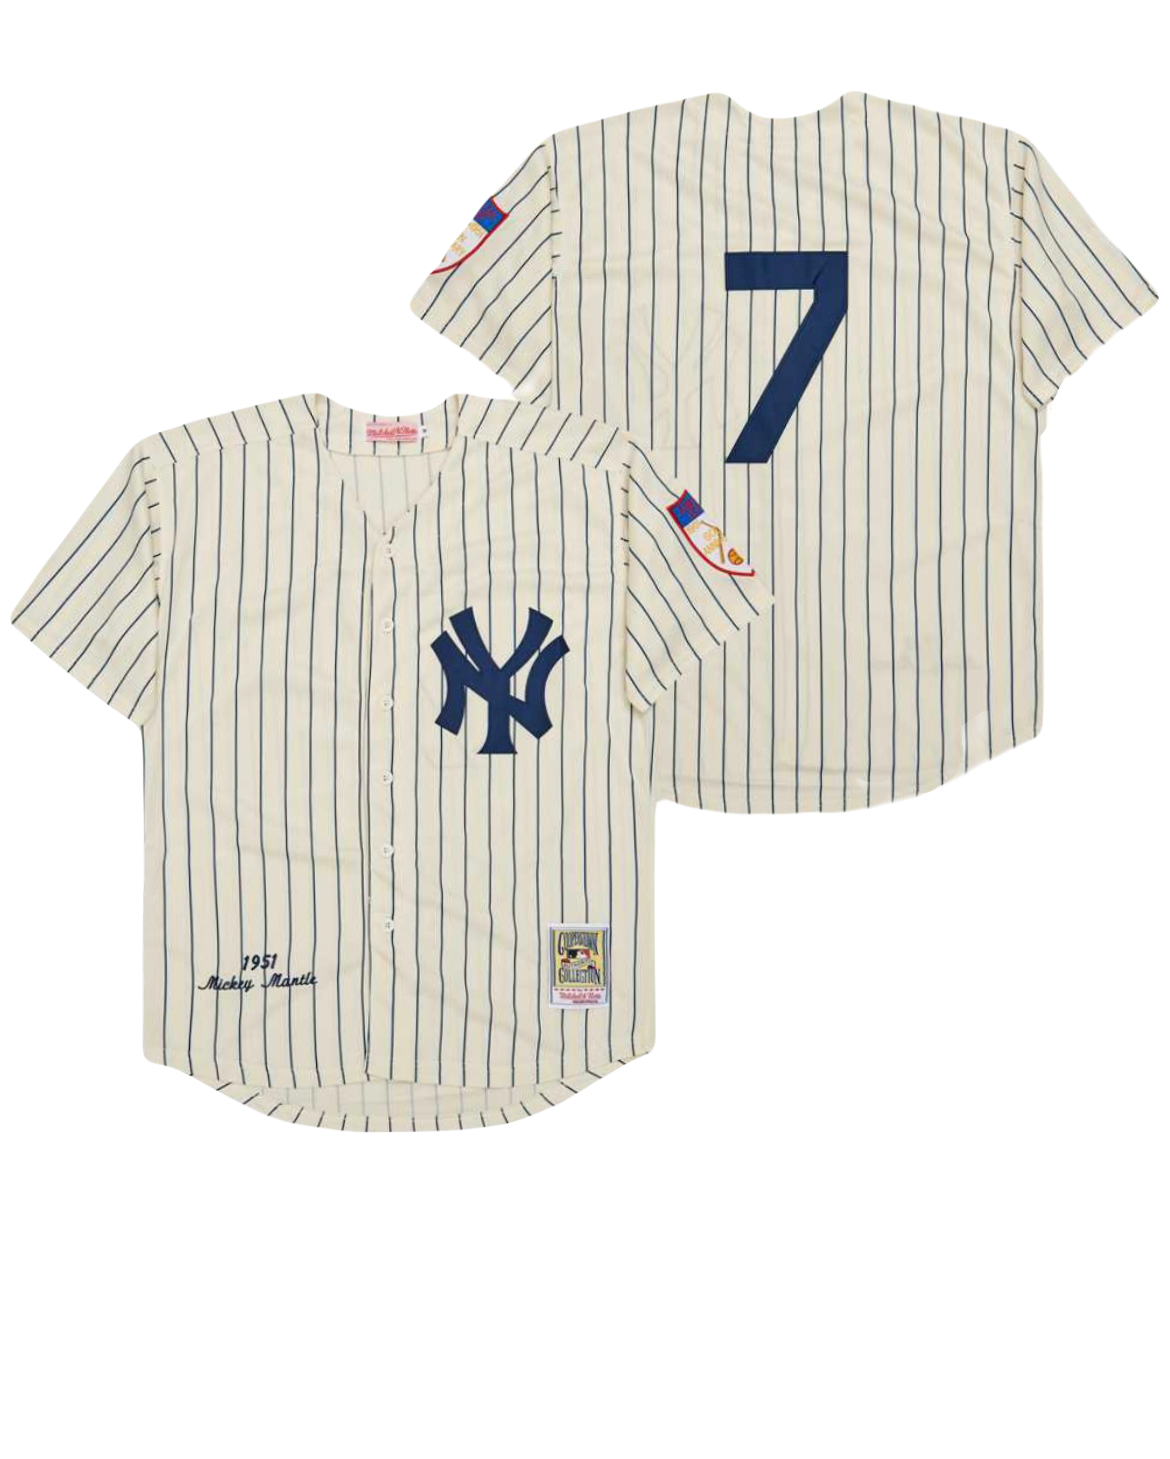 mickey mantle's jersey